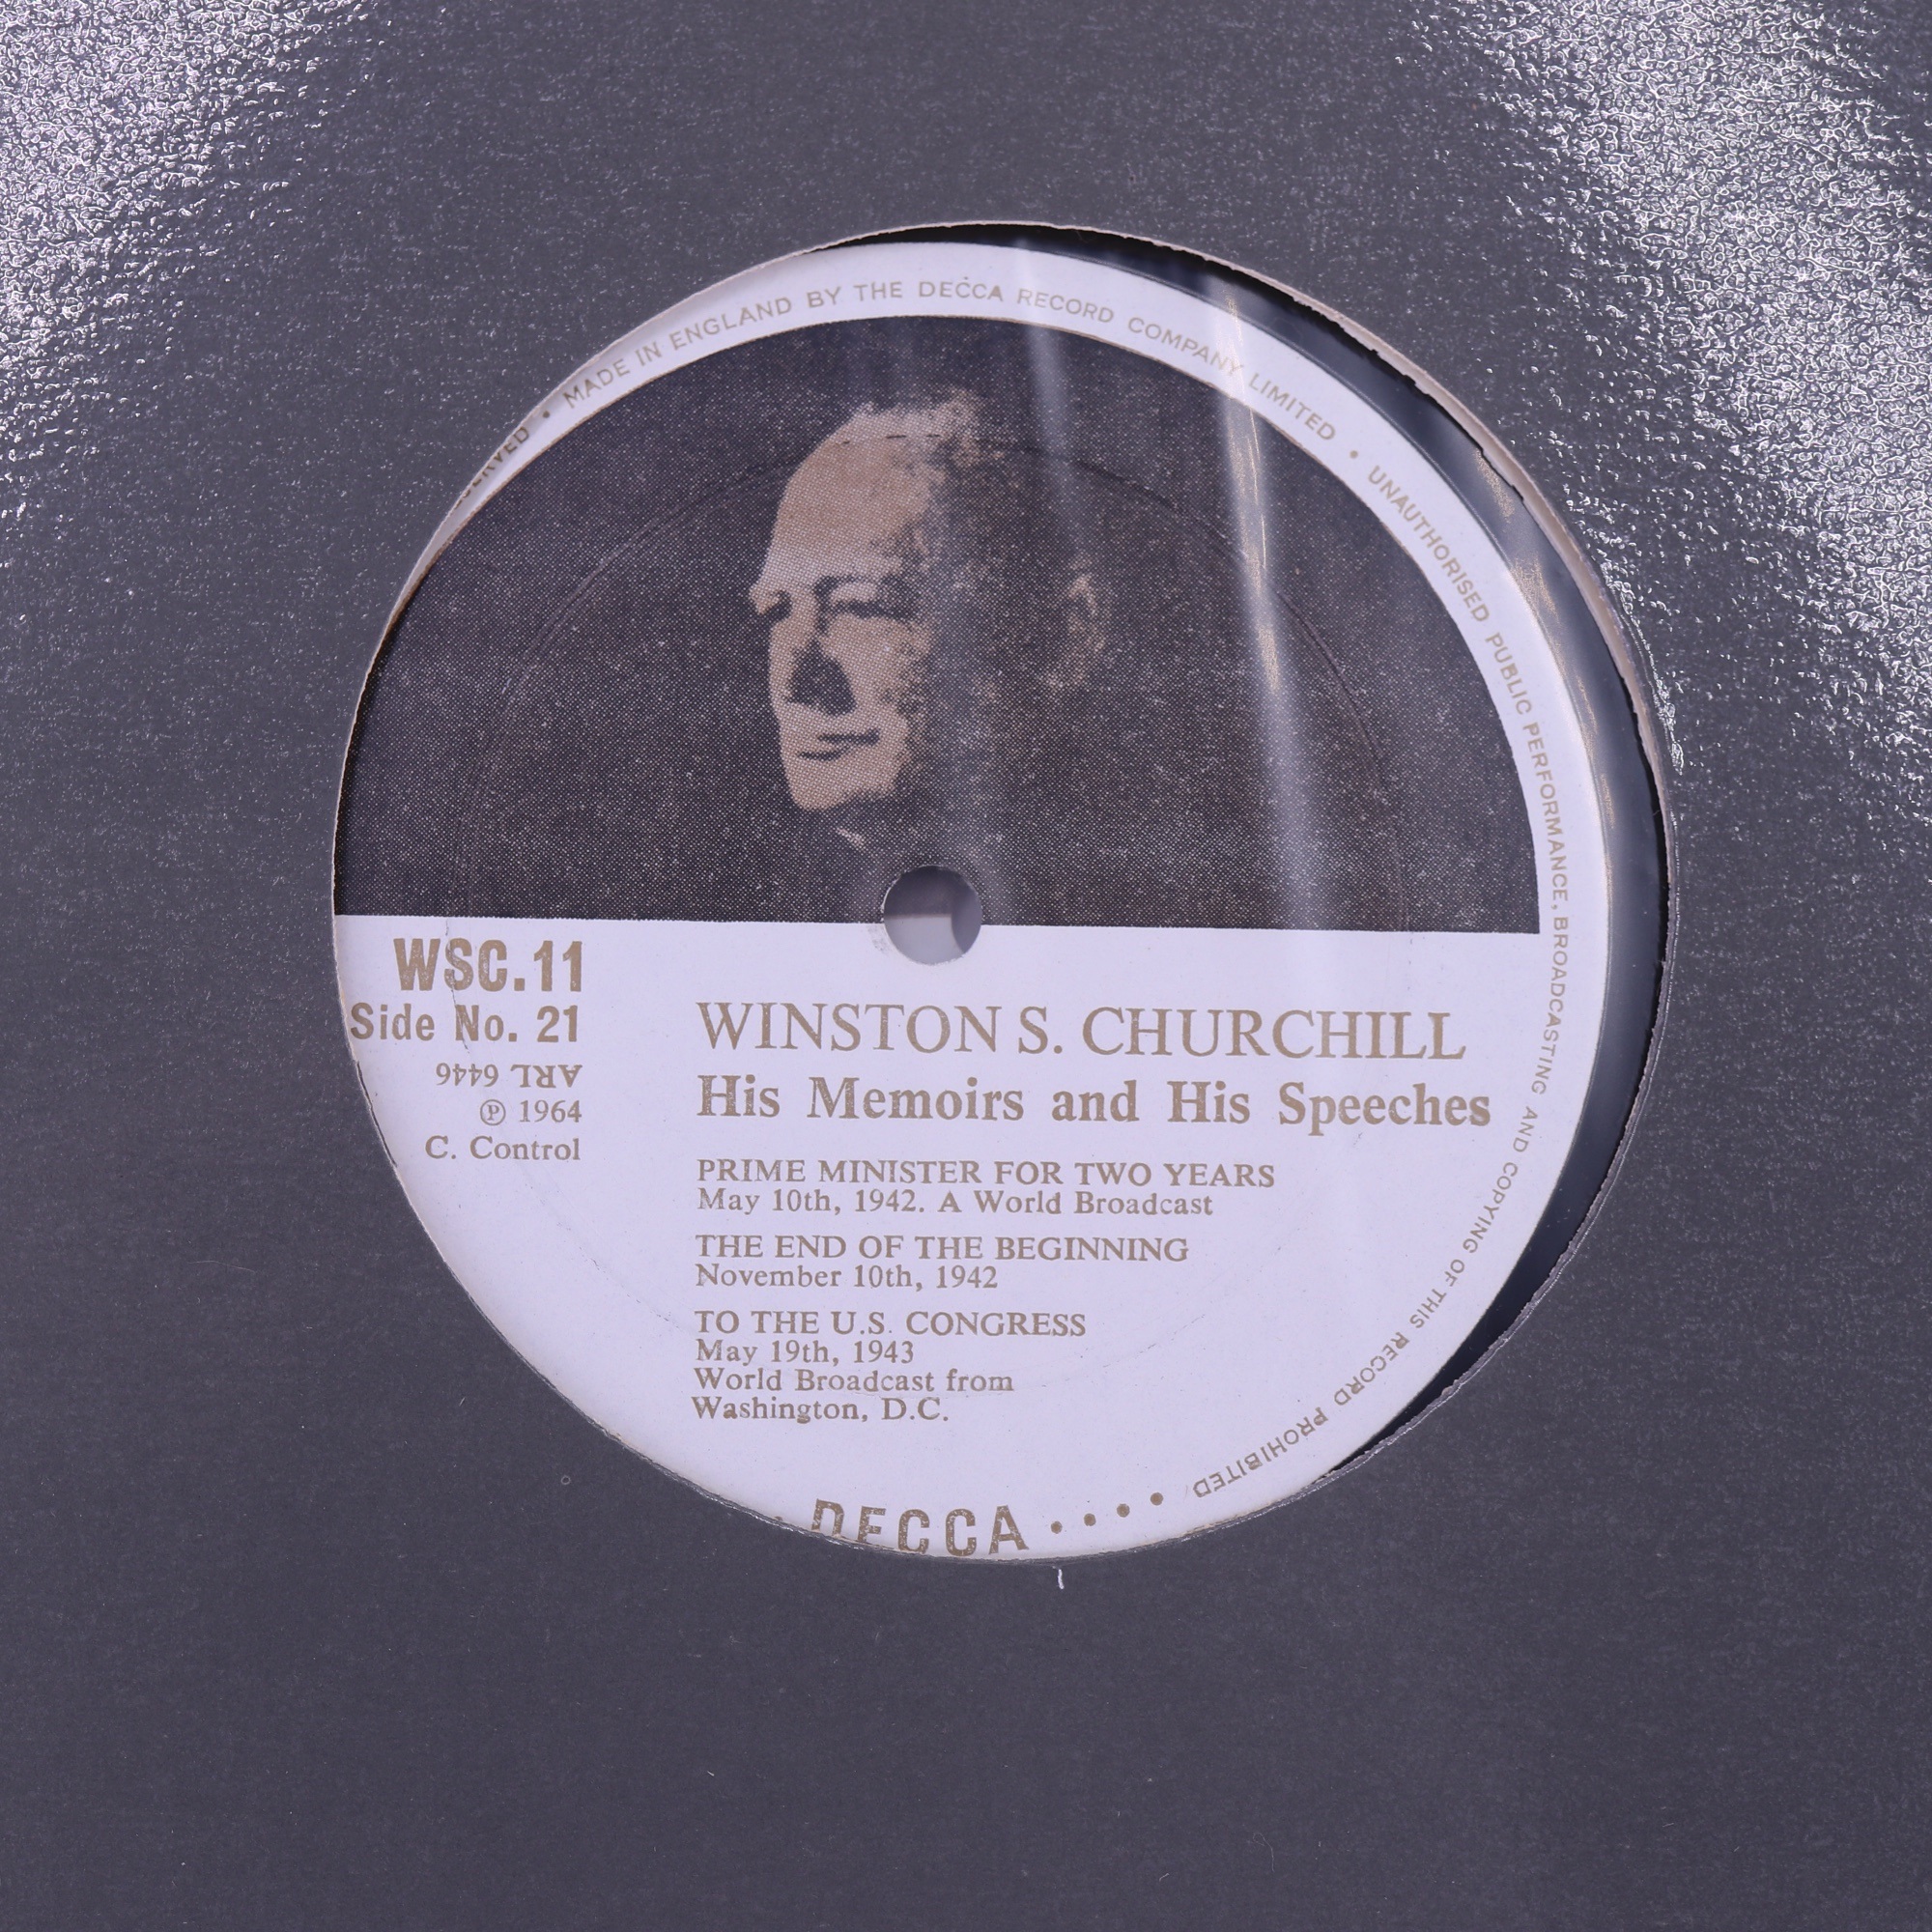 A 12-disc set of "Winston S Churchill, His Memoirs and His Speeches" 33 rpm vinyl records, Decca, - Image 12 of 13